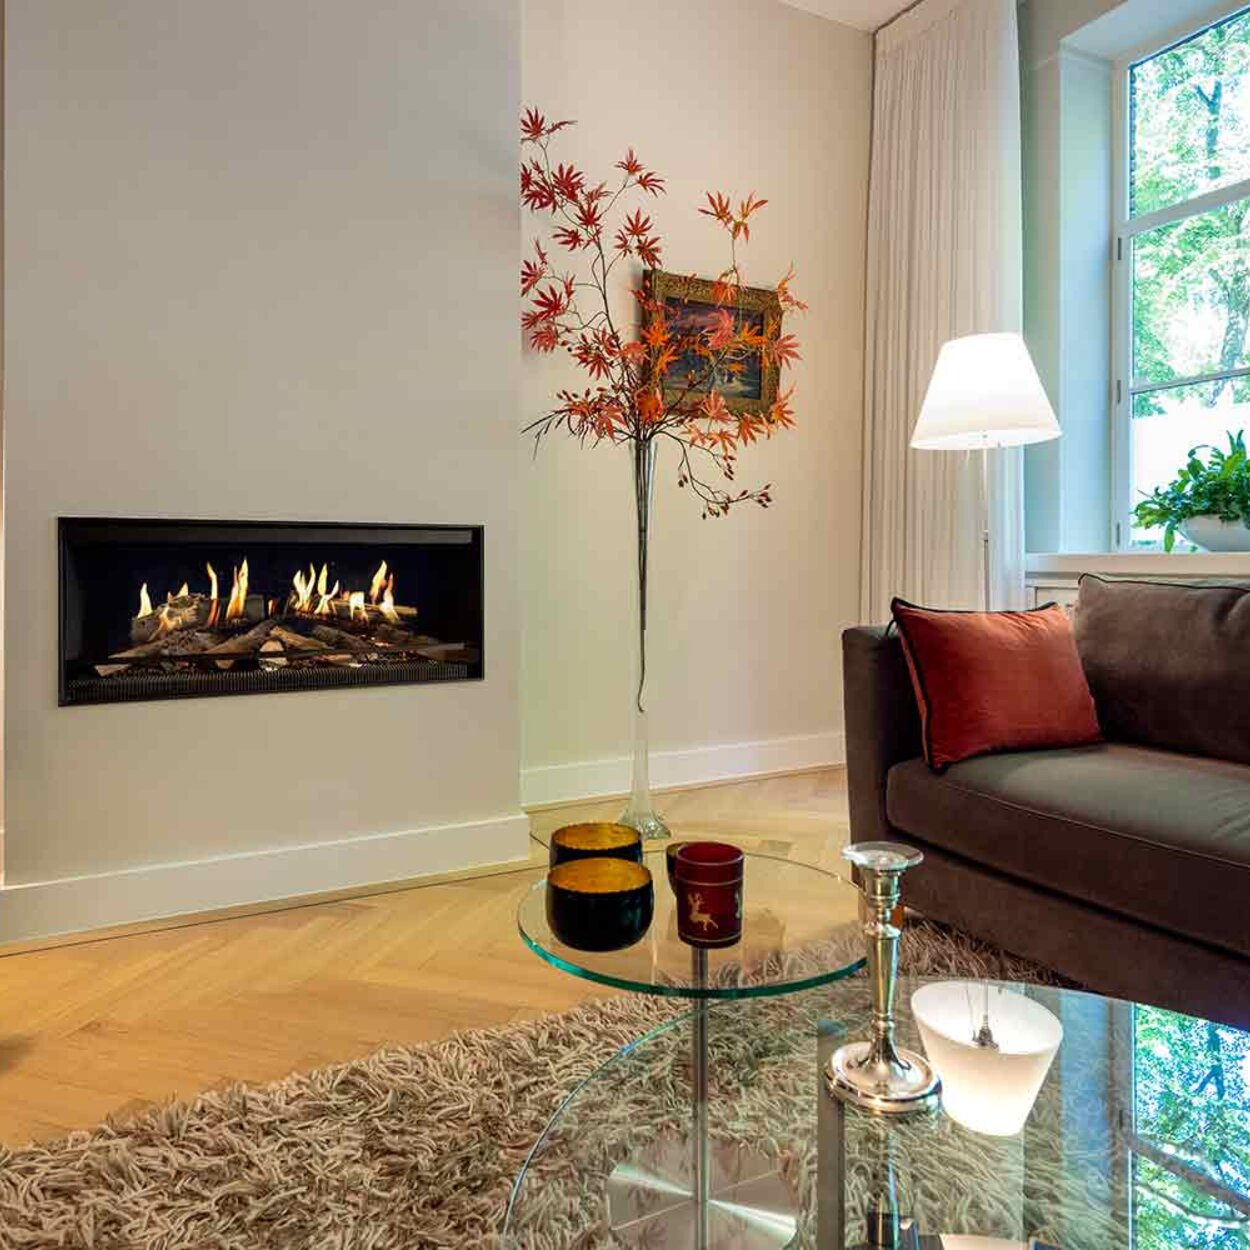 The E-One 100 Front electric fireplace installed in the living room of a country house with a white wall.